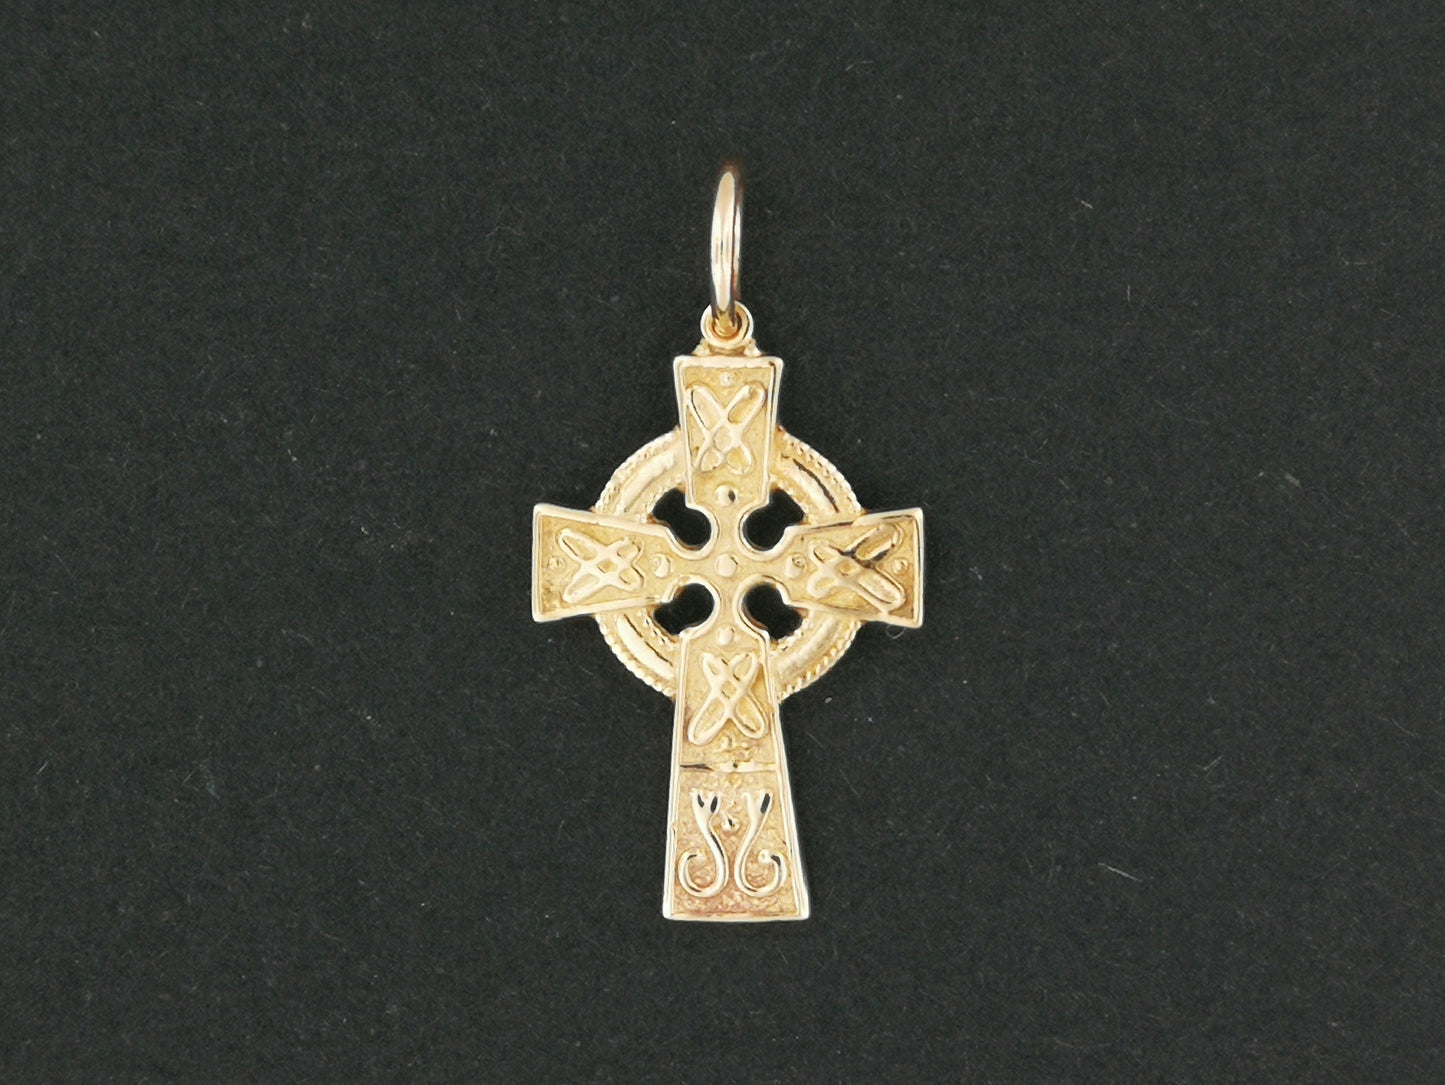 Small Celtic Cross in Sterling Silver or Antique Bronze, Silver Celtic Cross Pendant, Bronze Celtic Cross Pendant, Sterling Silver Celtic Jewelry, Sterling Silver Celtic Jewellery, Antique Bronze Celtic Jewelry, Antique Bronze Celtic Jewellery, Irish Cross Charm, Celtic Cross Pendant, Celtic Cross Pendant, Silver Celtic Cross Pendant, Bronze Celtic Cross Pendant, Irish Celtic Jewelry, Irish Cross Jewellery